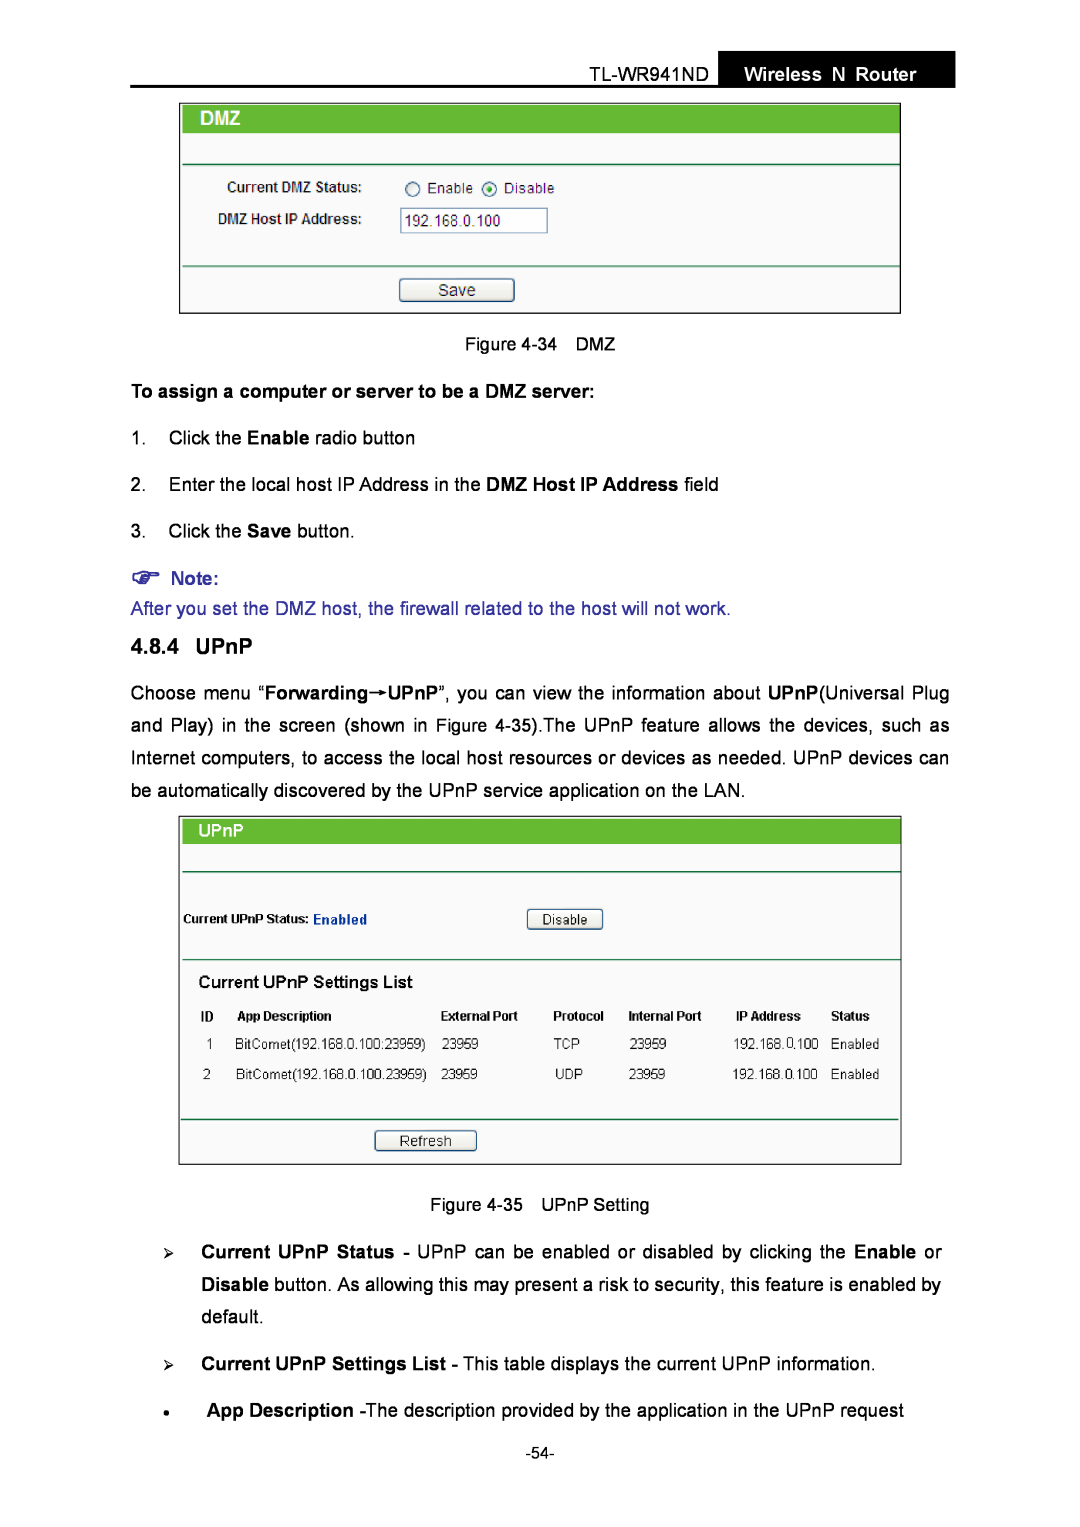 TP-Link manual UPnP, To assign a computer or server to be a DMZ server, TL-WR941ND Wireless N Router 